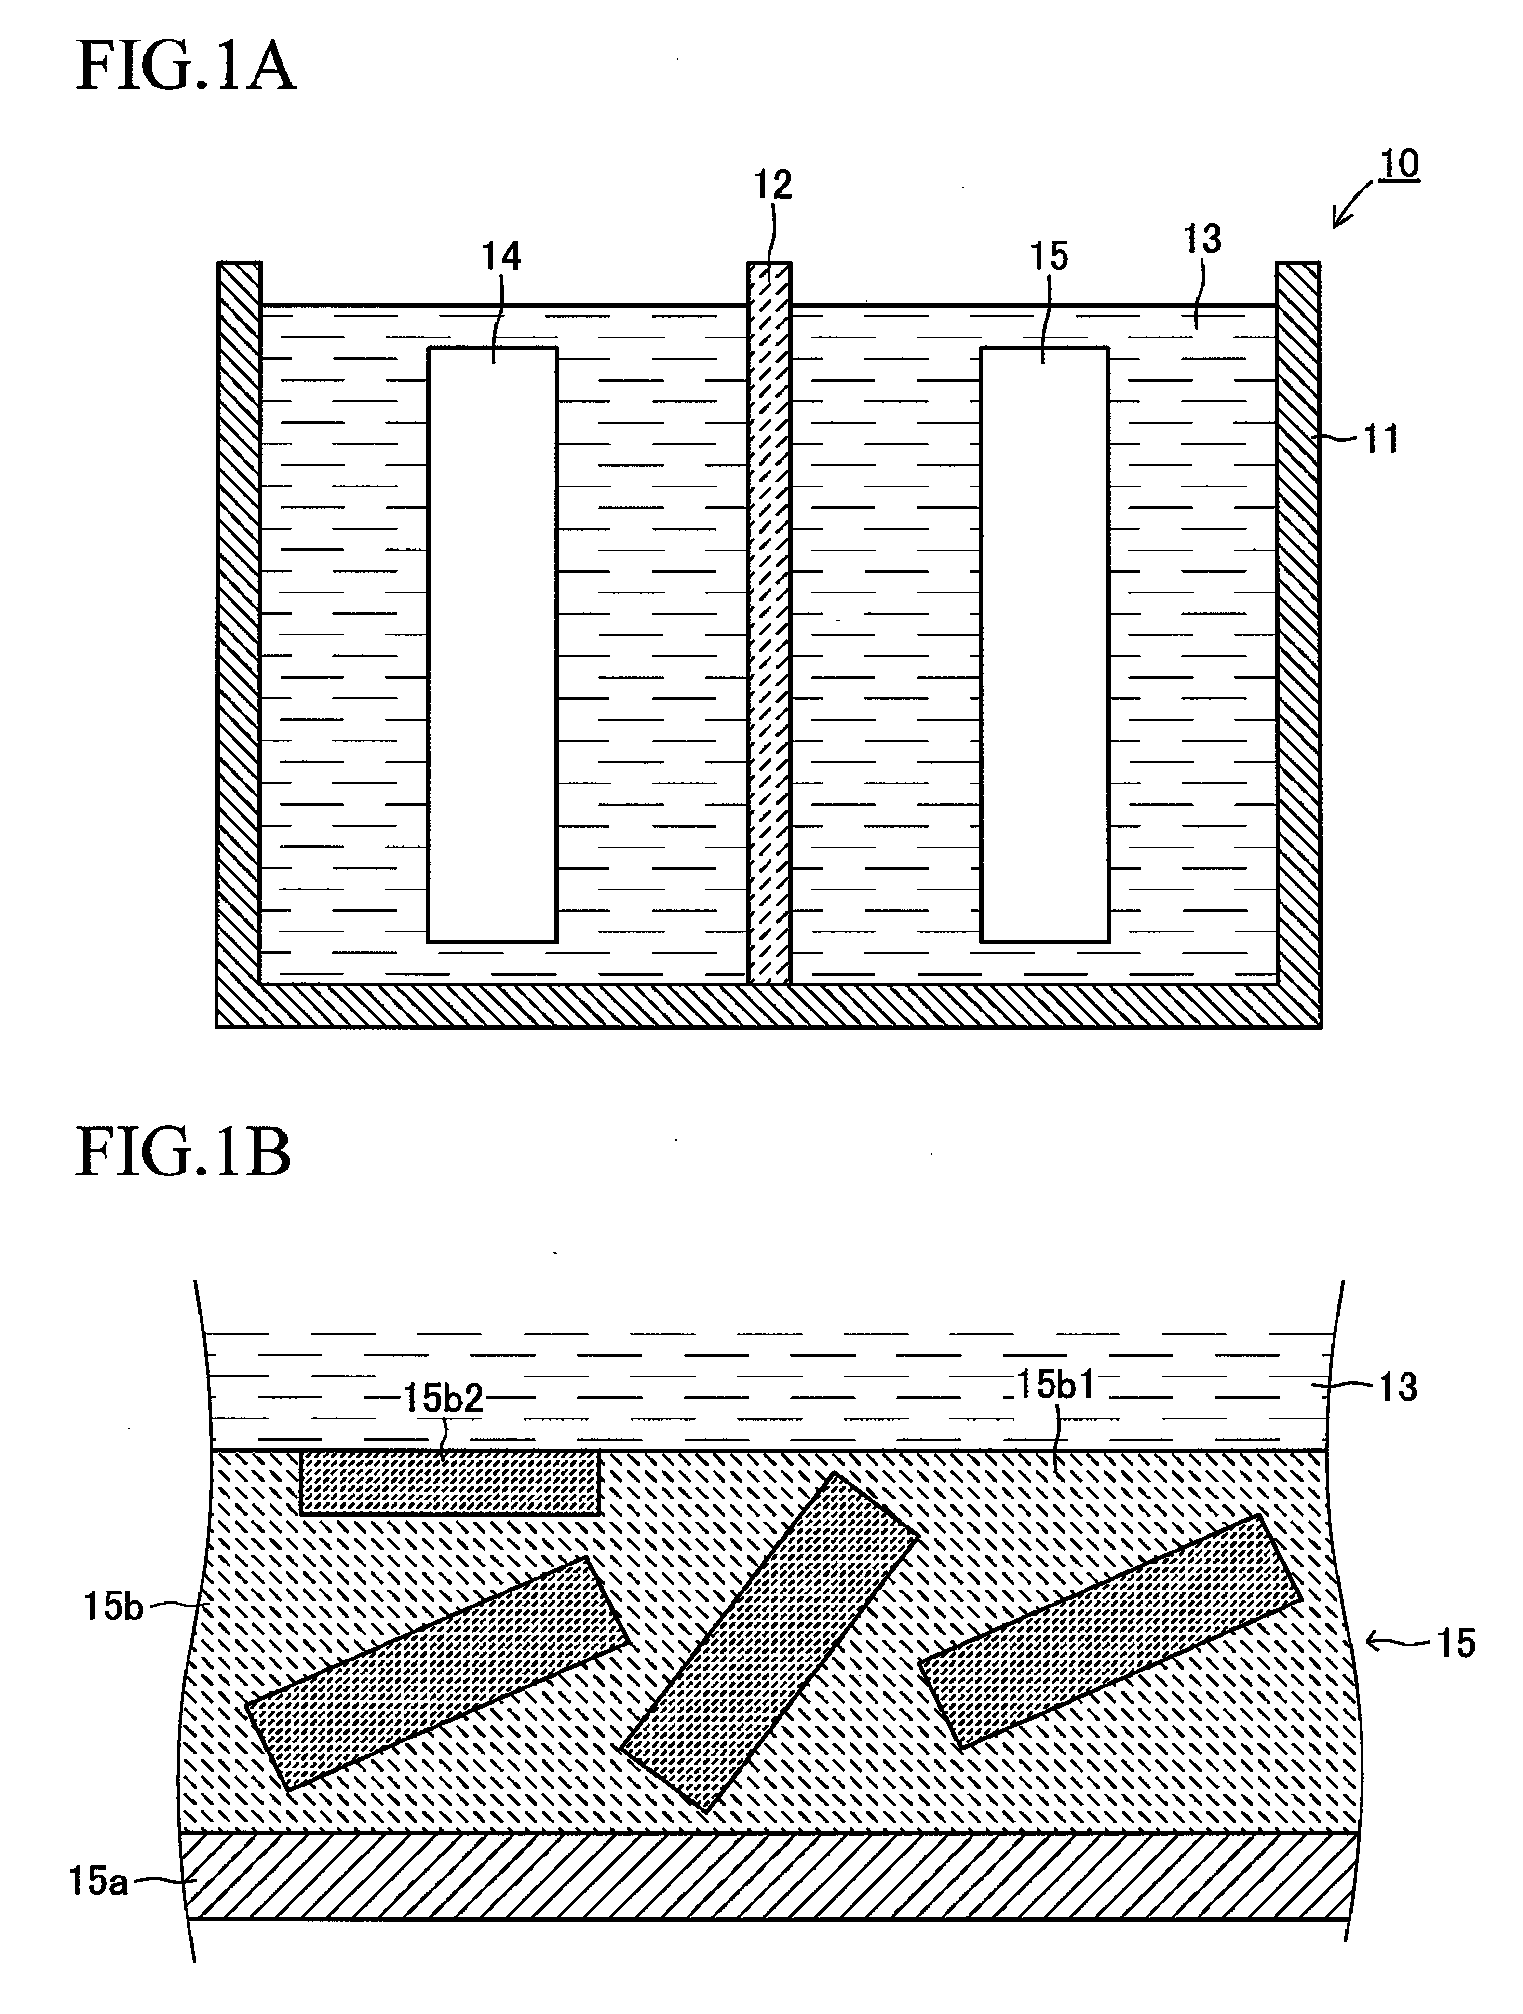 Plate-like particle for cathode active material of a lithium secondary battery, a cathode active material film of a lithium secondary battery, and a lithium secondary battery